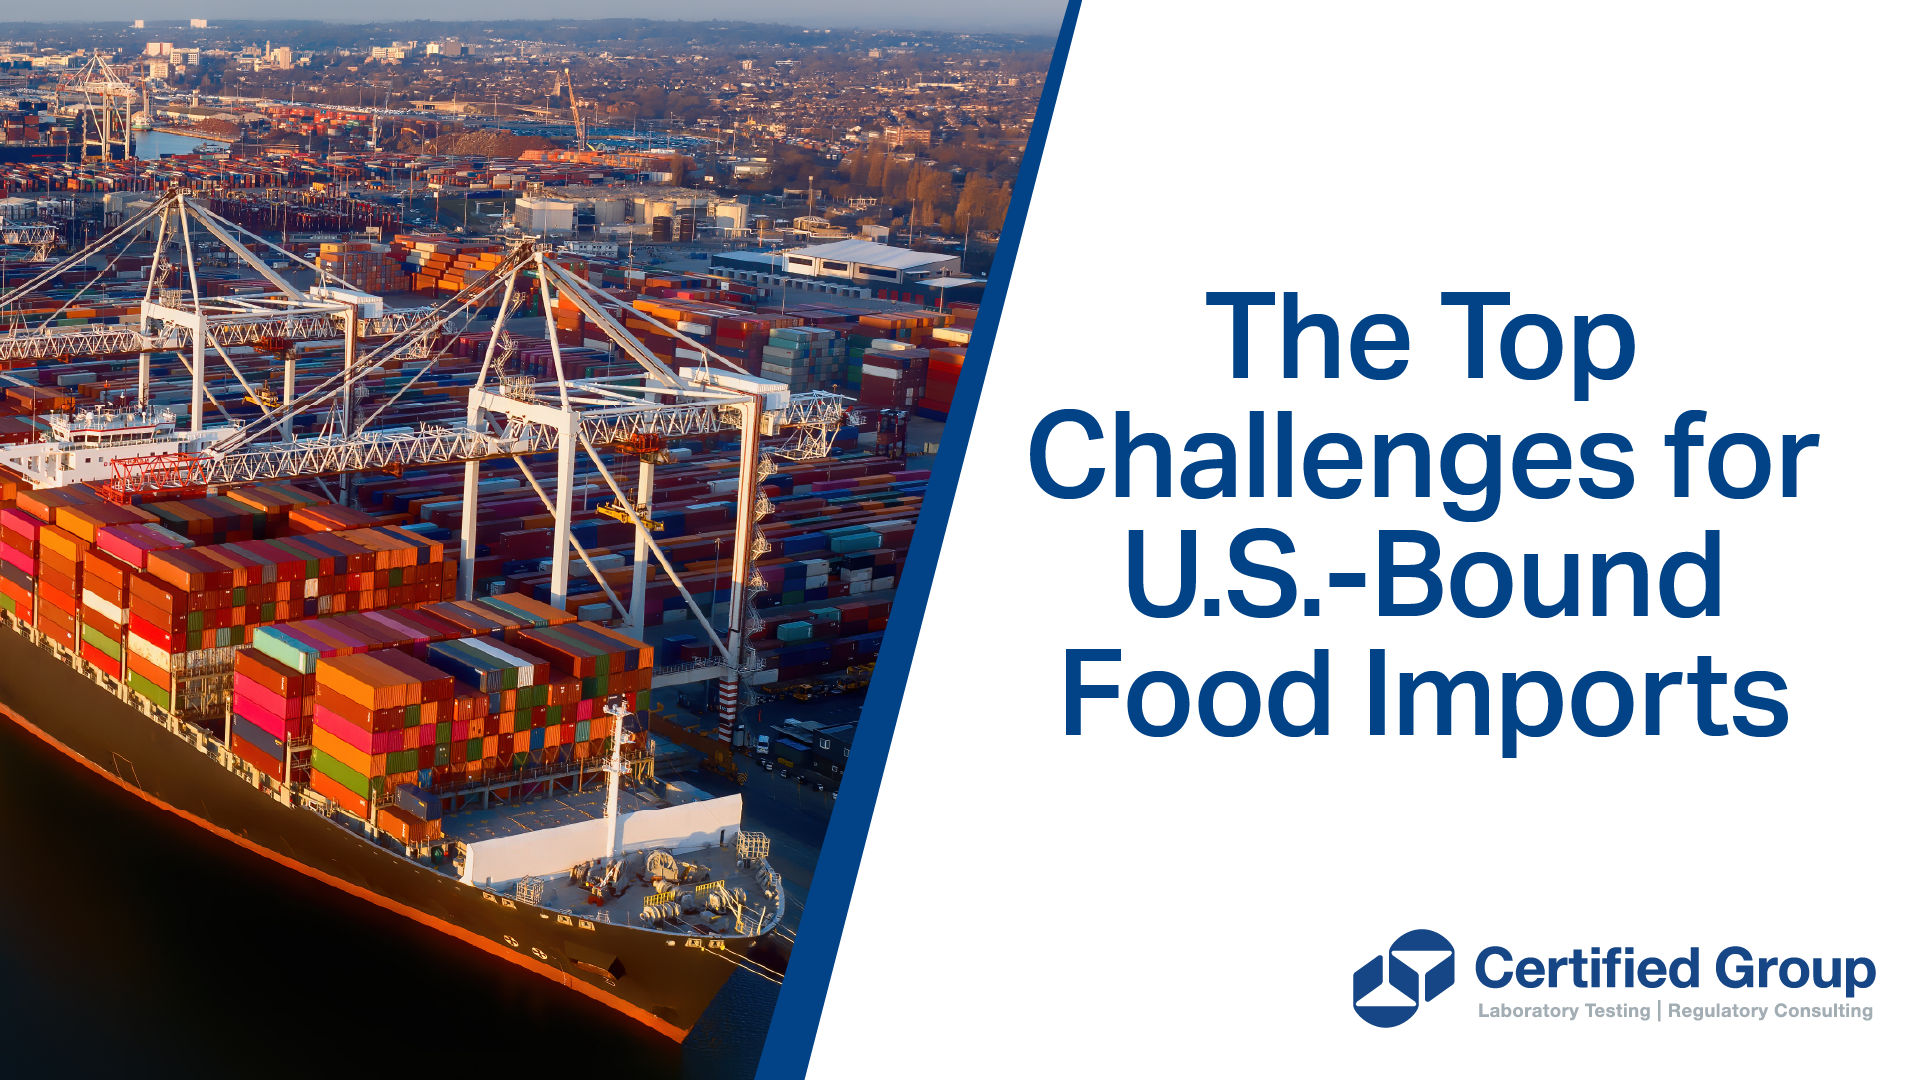 Challenges when importing food into the U.S. 